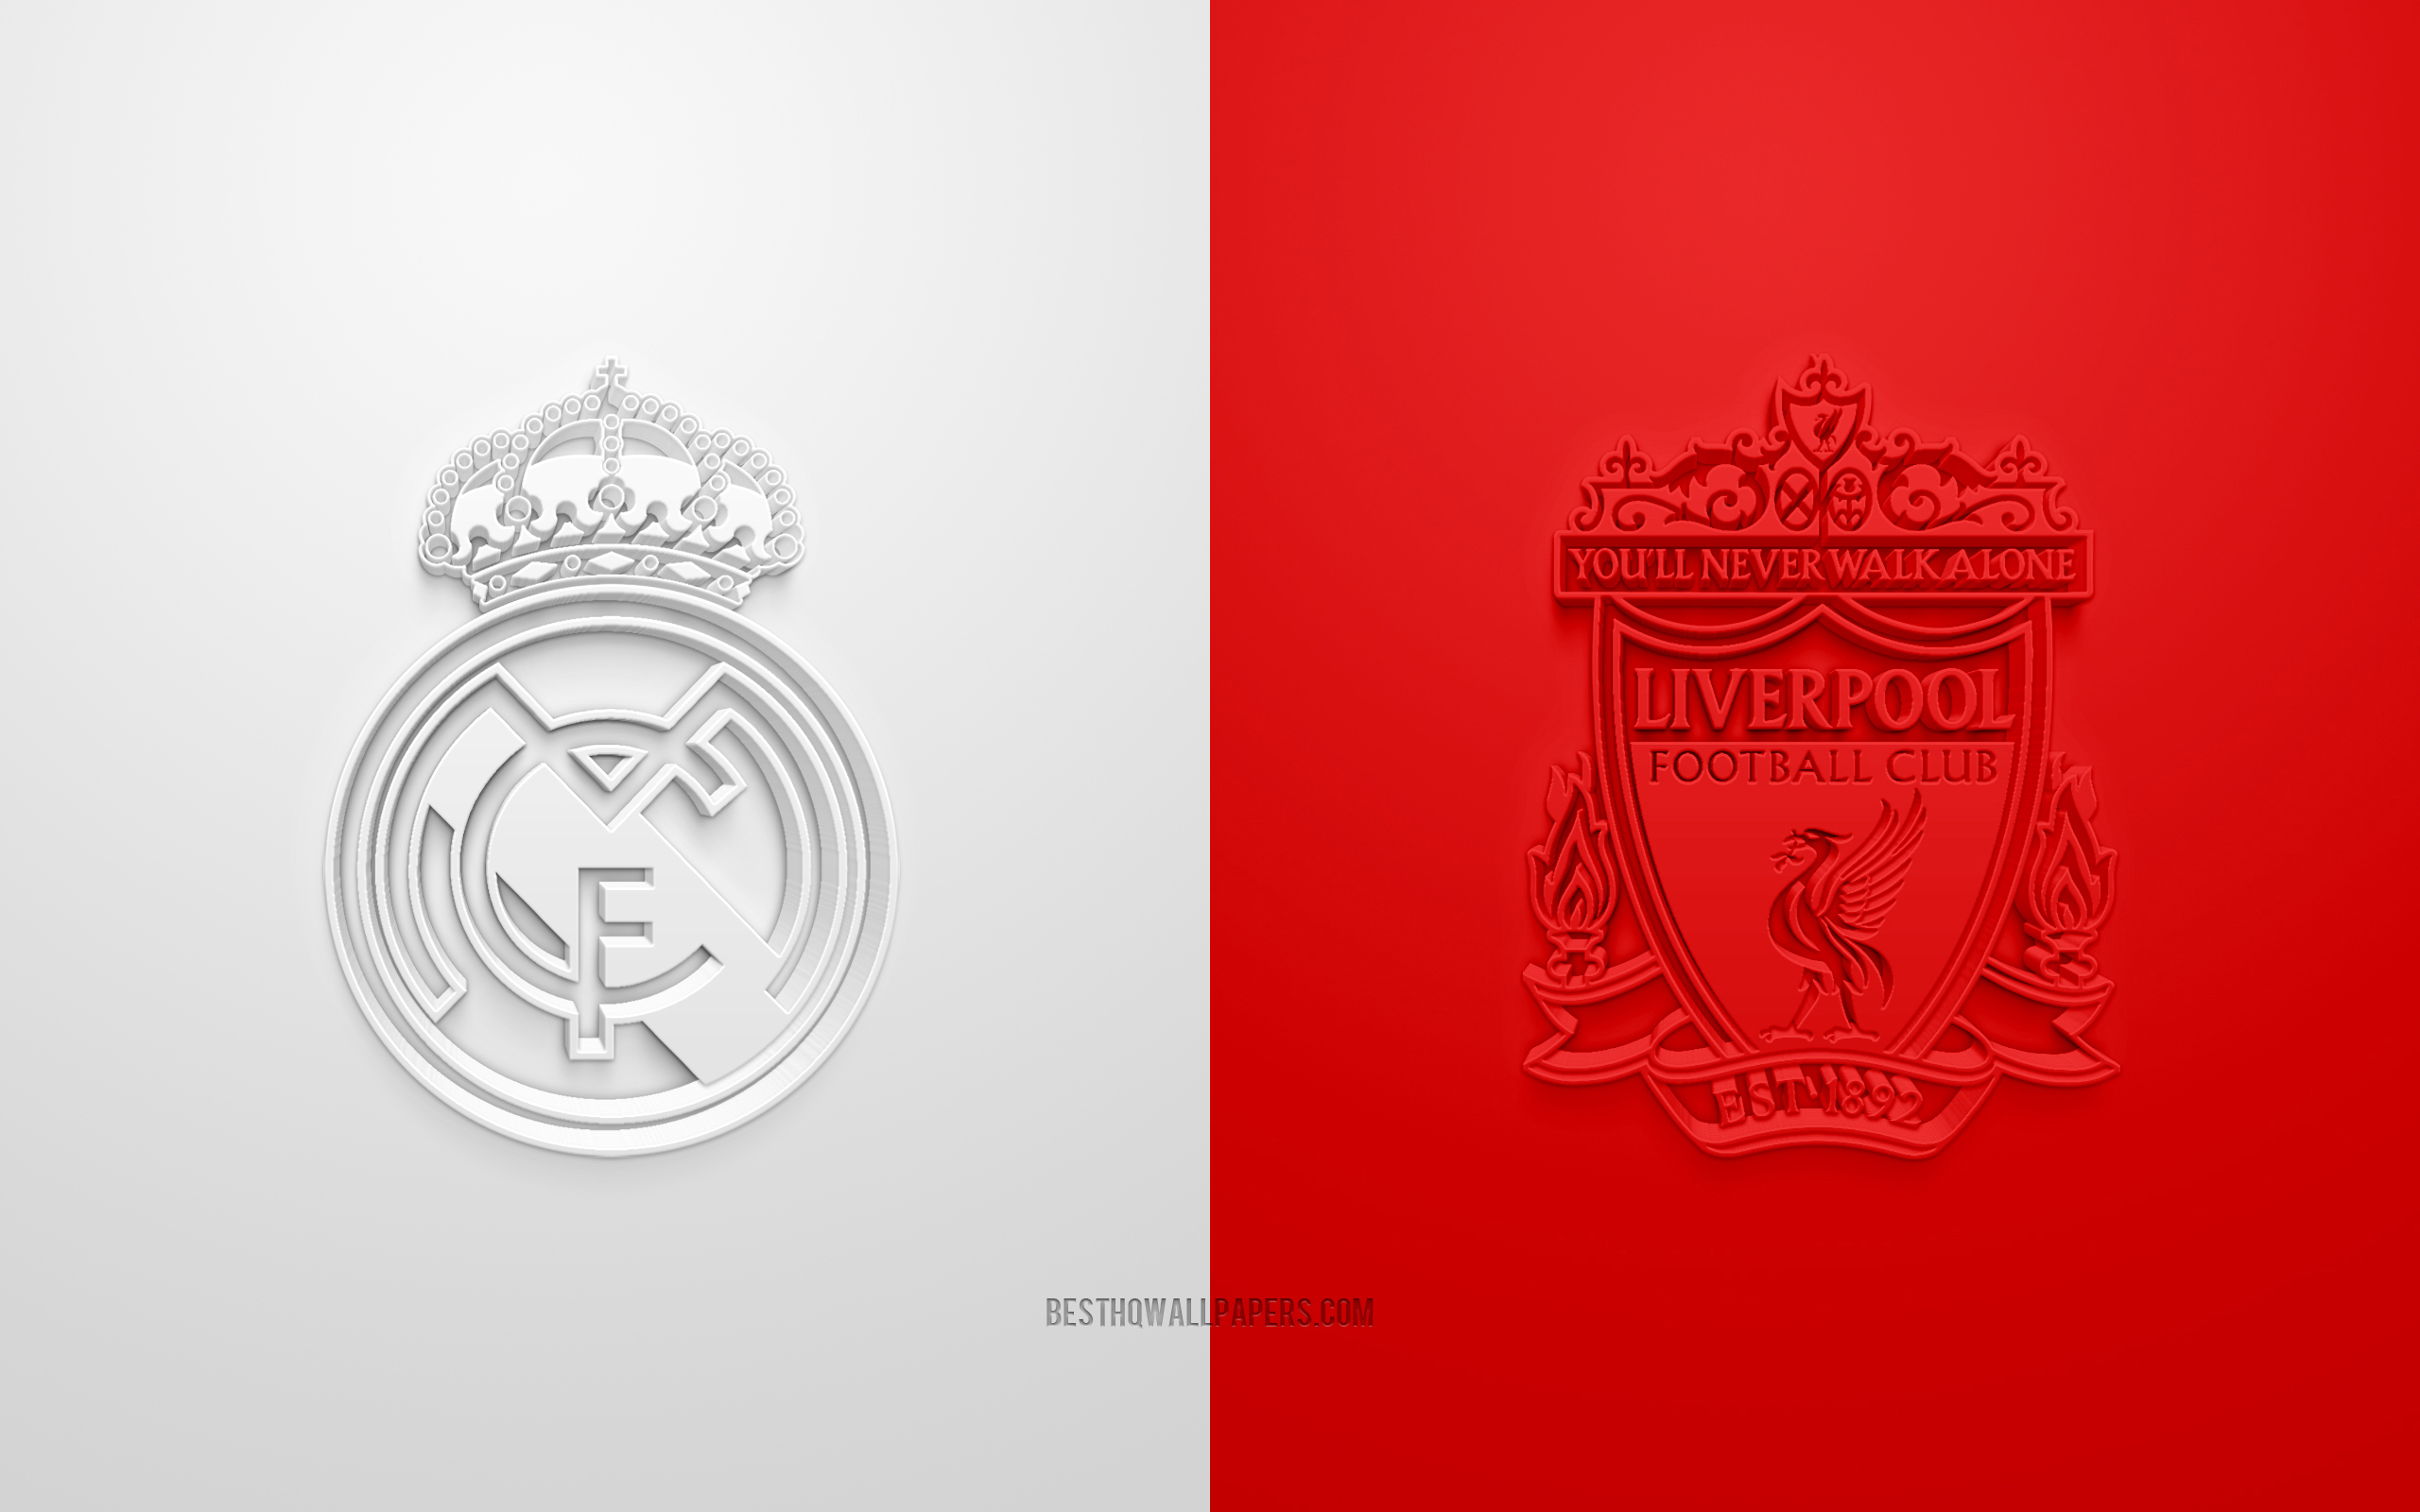 Download wallpaper Real Madrid vs Liverpool FC, UEFA Champions League, quarterfinals, 3D logos, red and white background, Champions League, football match, Liverpool FC, Real Madrid for desktop with resolution 2560x1600. High Quality